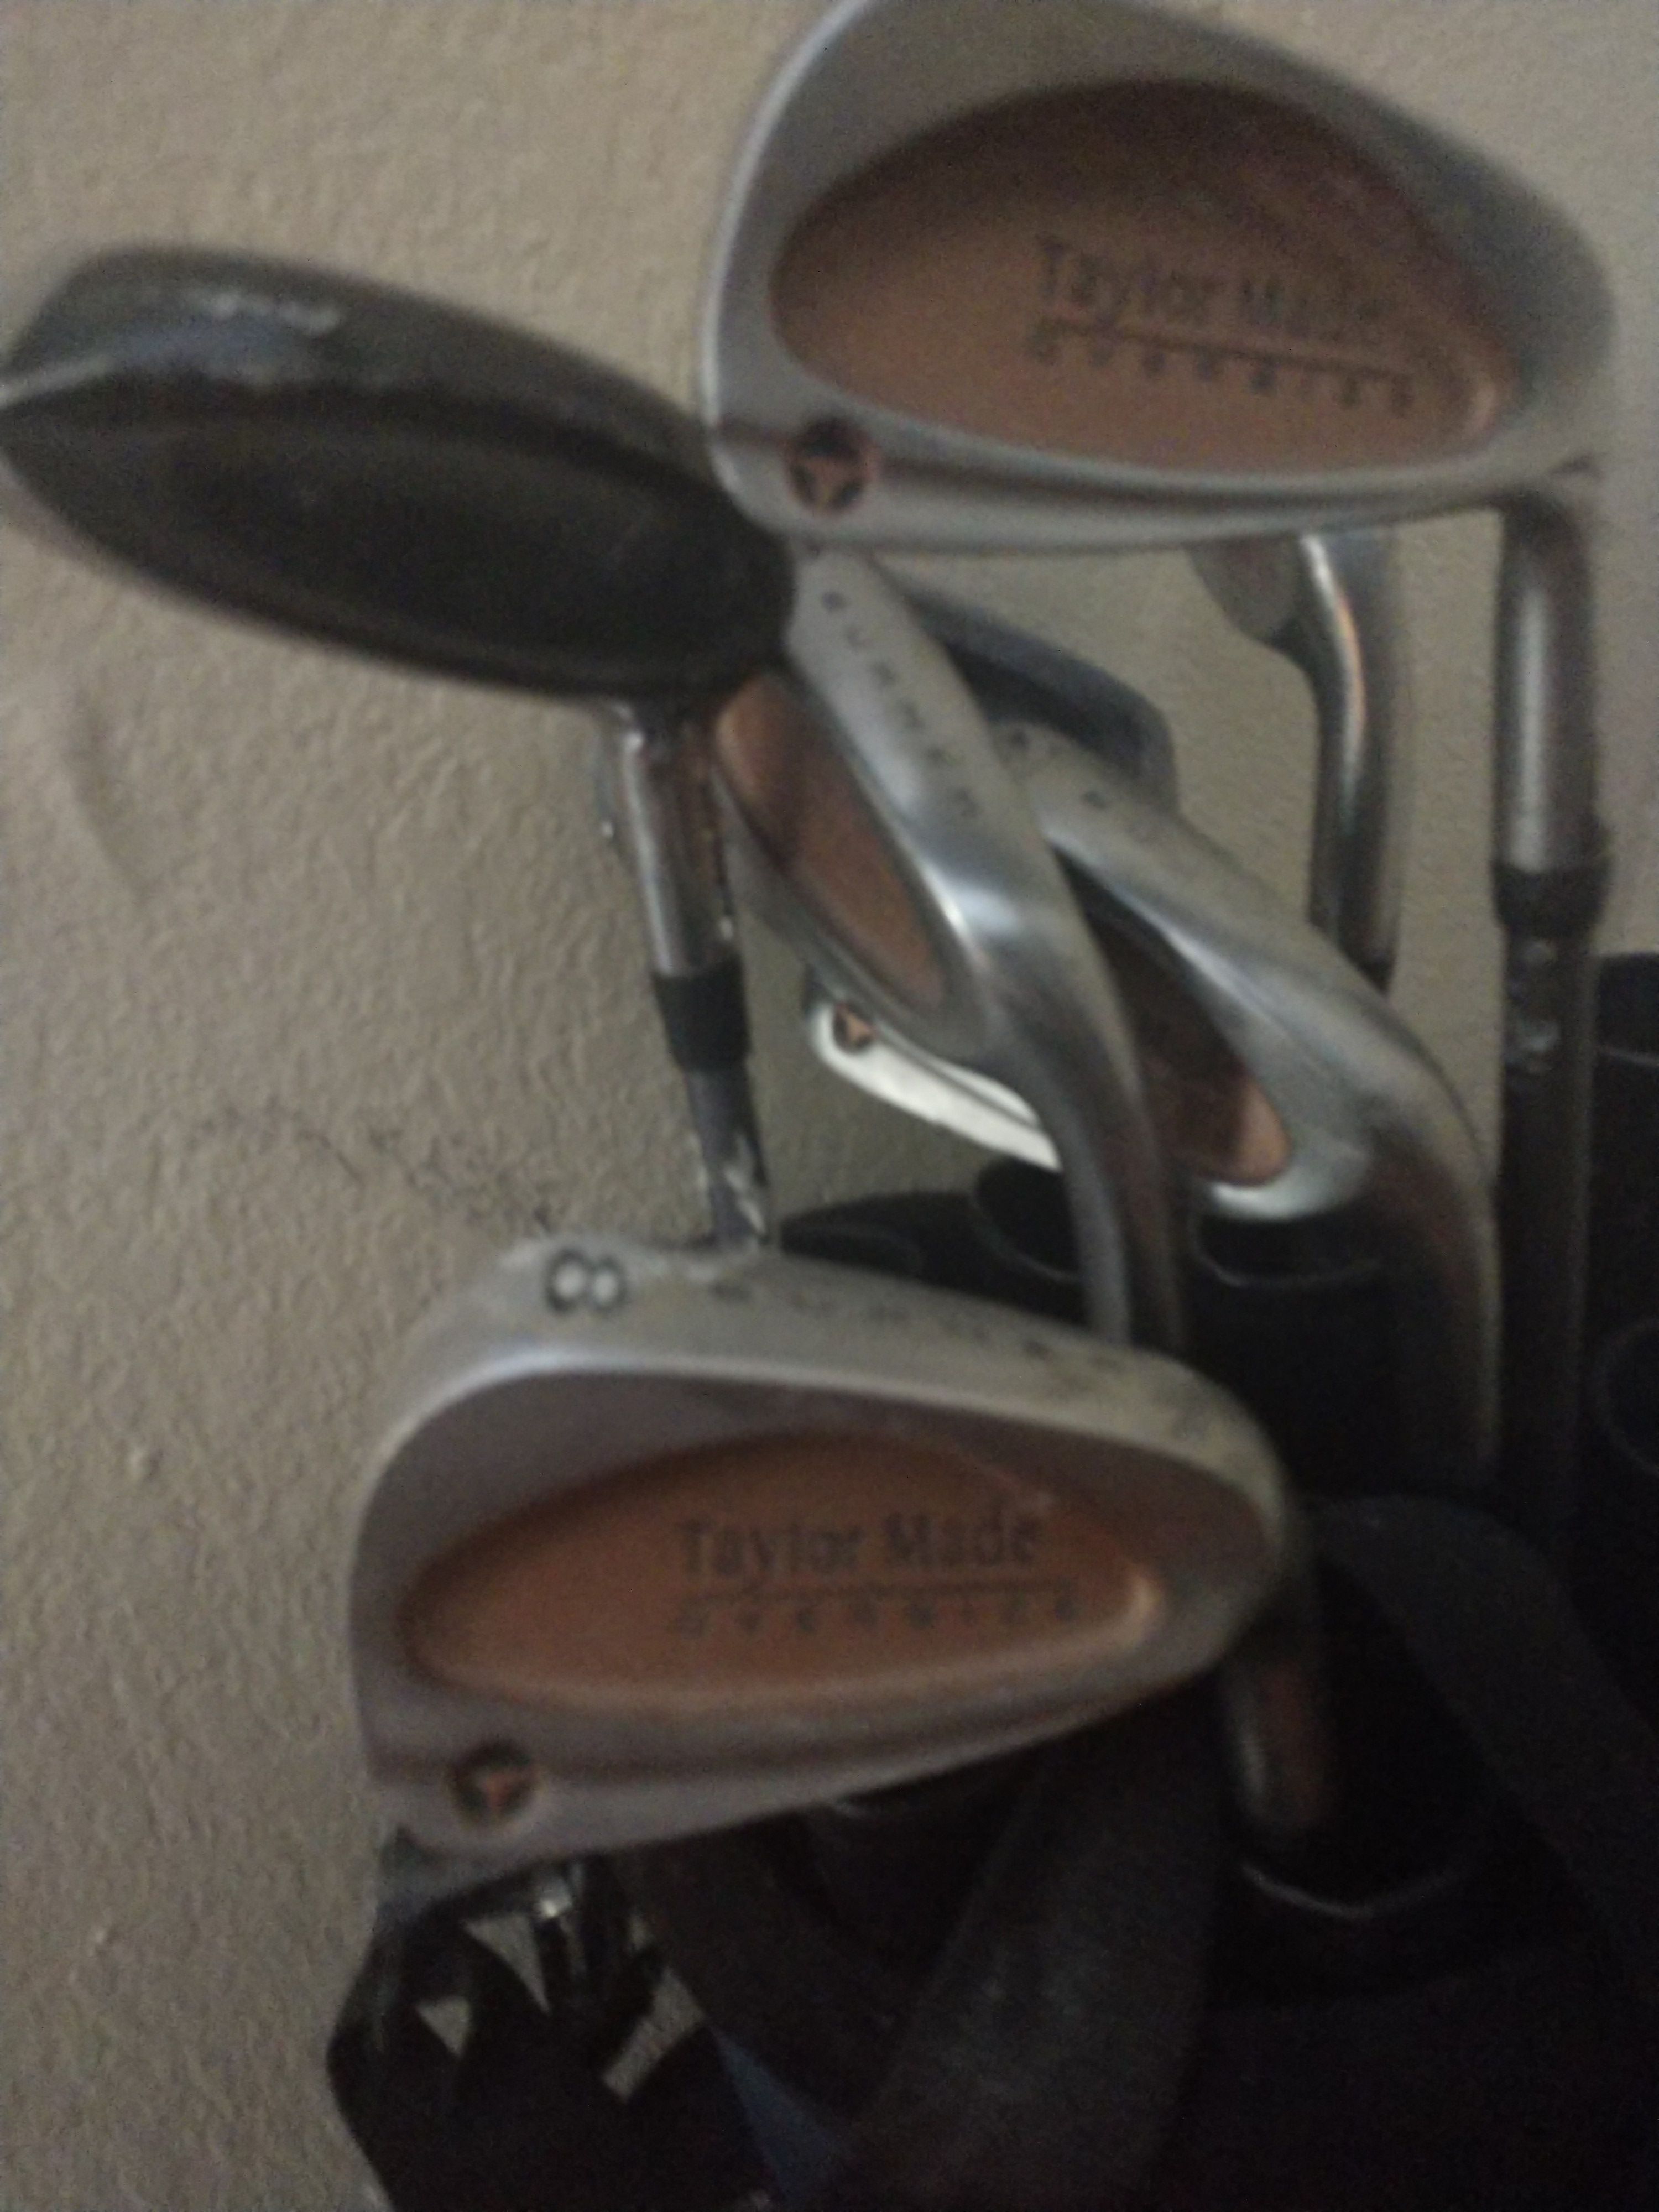 Golf clubs mostly taylor made total of 8 bag balls tees & more included